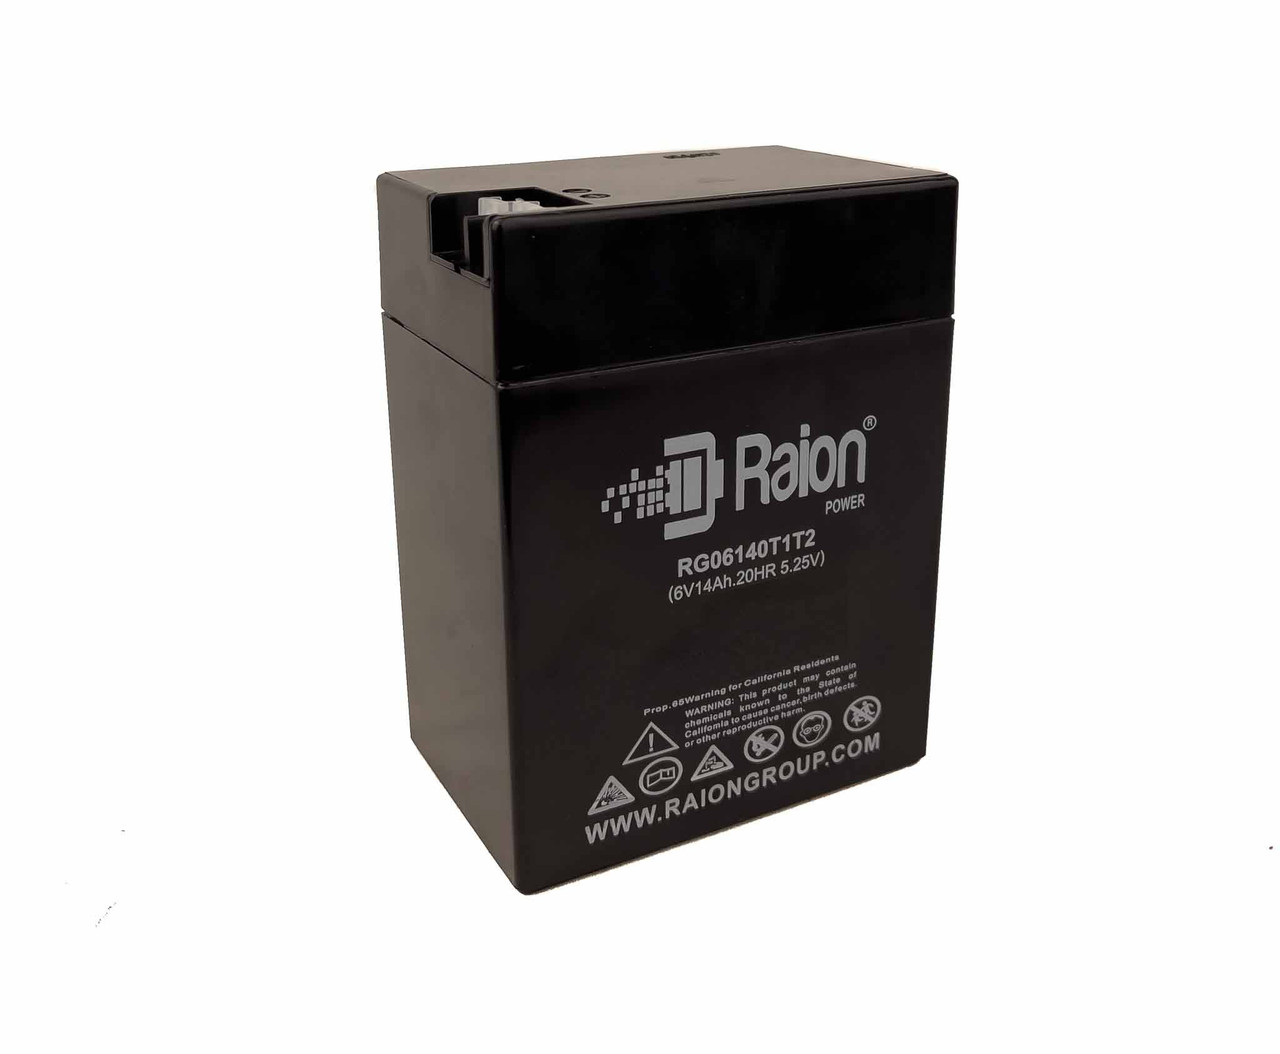 Raion Power RG06140T1T2 Non-Spillable Replacement Battery for Cycle Sound Pro 250 76115-9993